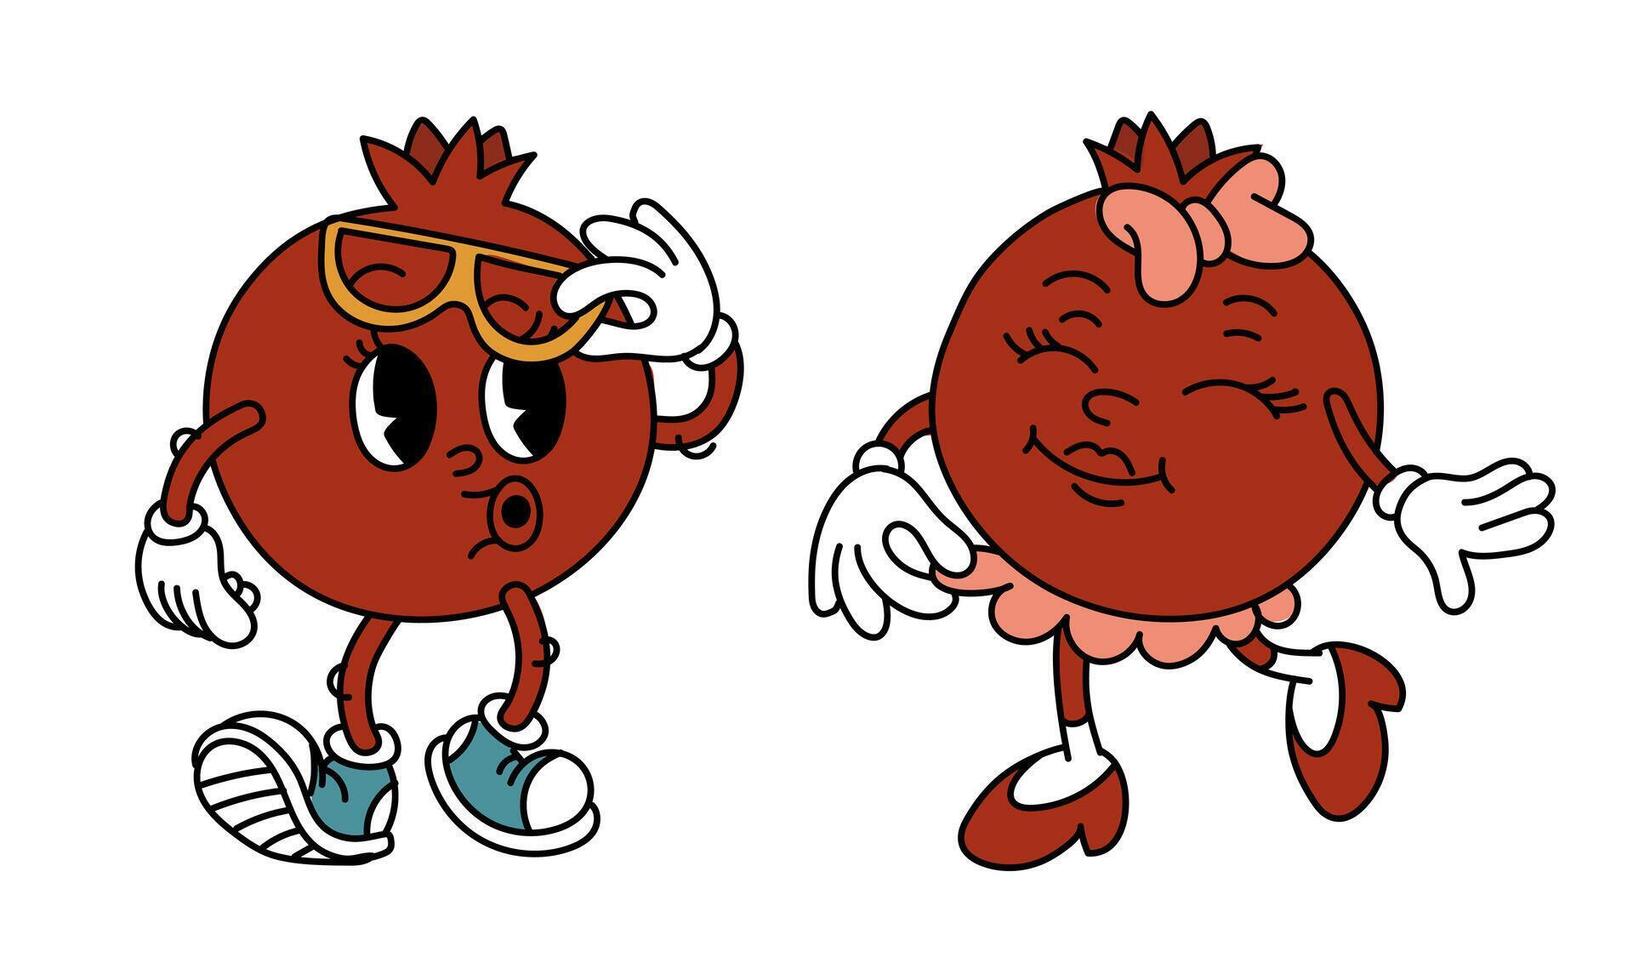 Retro pair of Groovy pomegranate fruits. Emotional stickers with funny comic book characters, gloved hands, a boy, a girl. Grenades with emotions on their face. Cool fruits. Funny y2k, 70s, 60s, retro vector